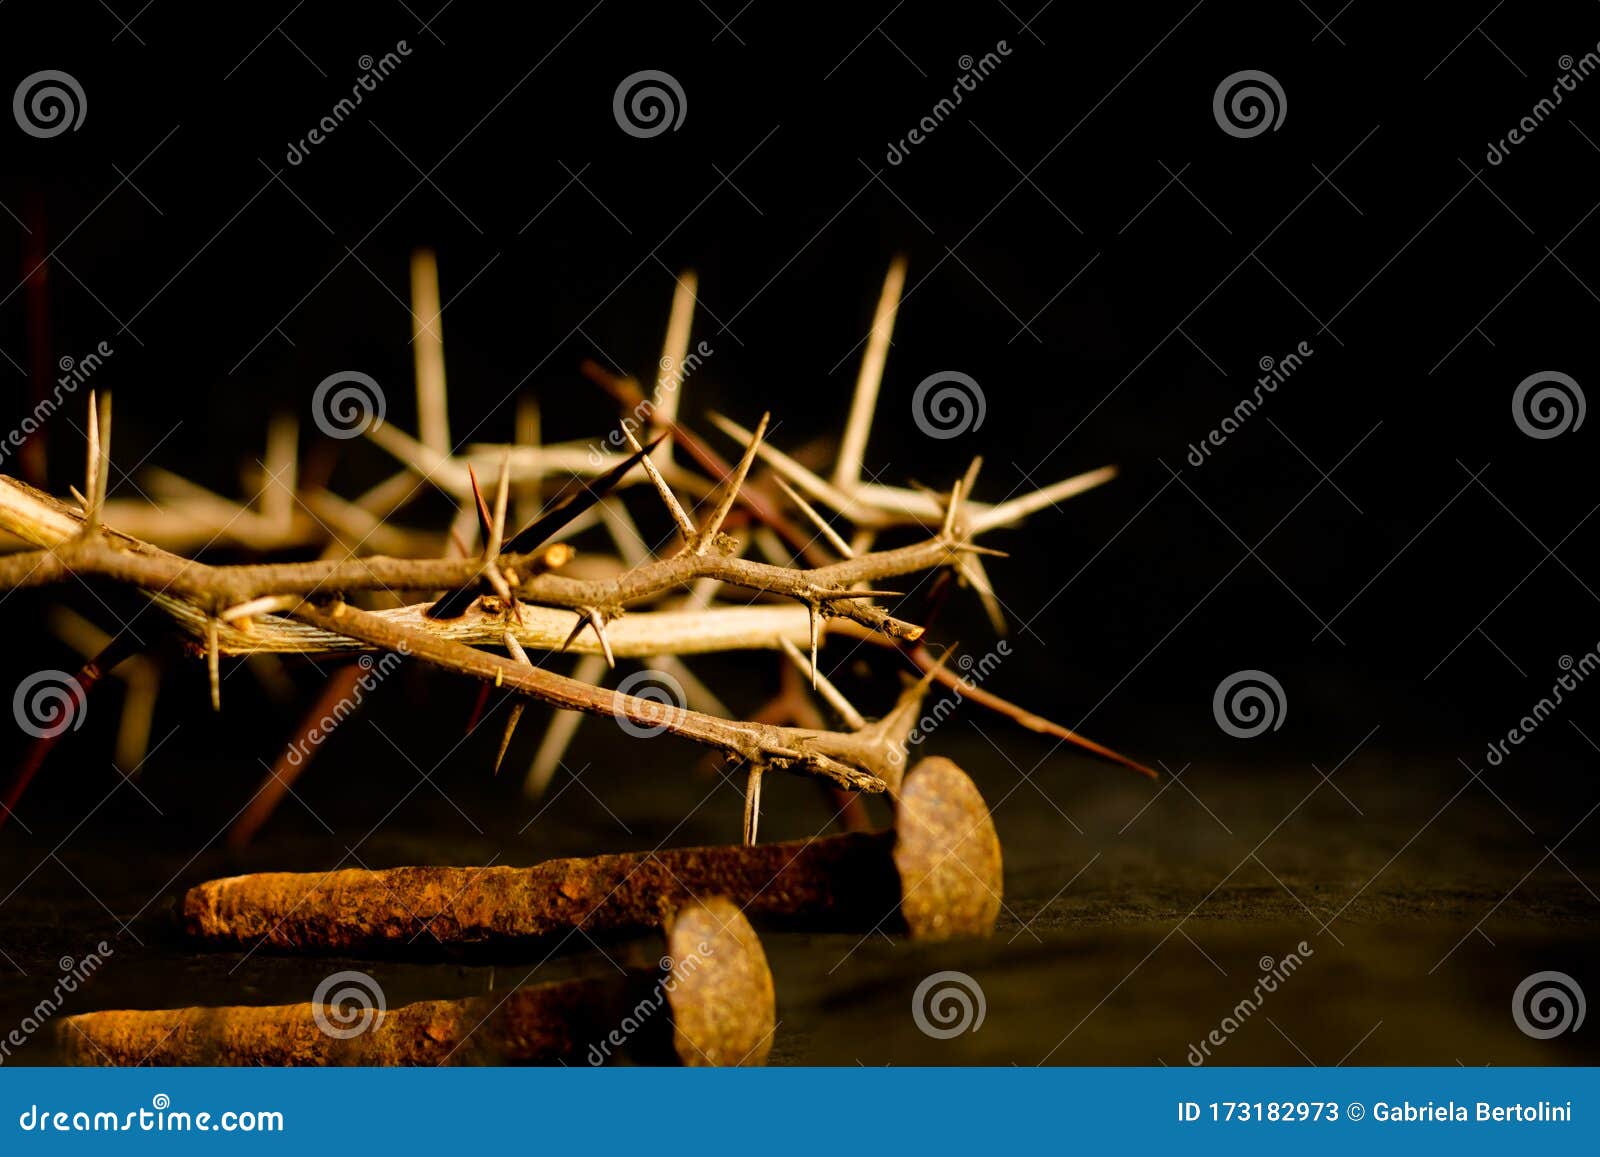 Premium Photo | Easter concept with cross, crown of thorns and nails  symbolizing the suffering of jesus christ